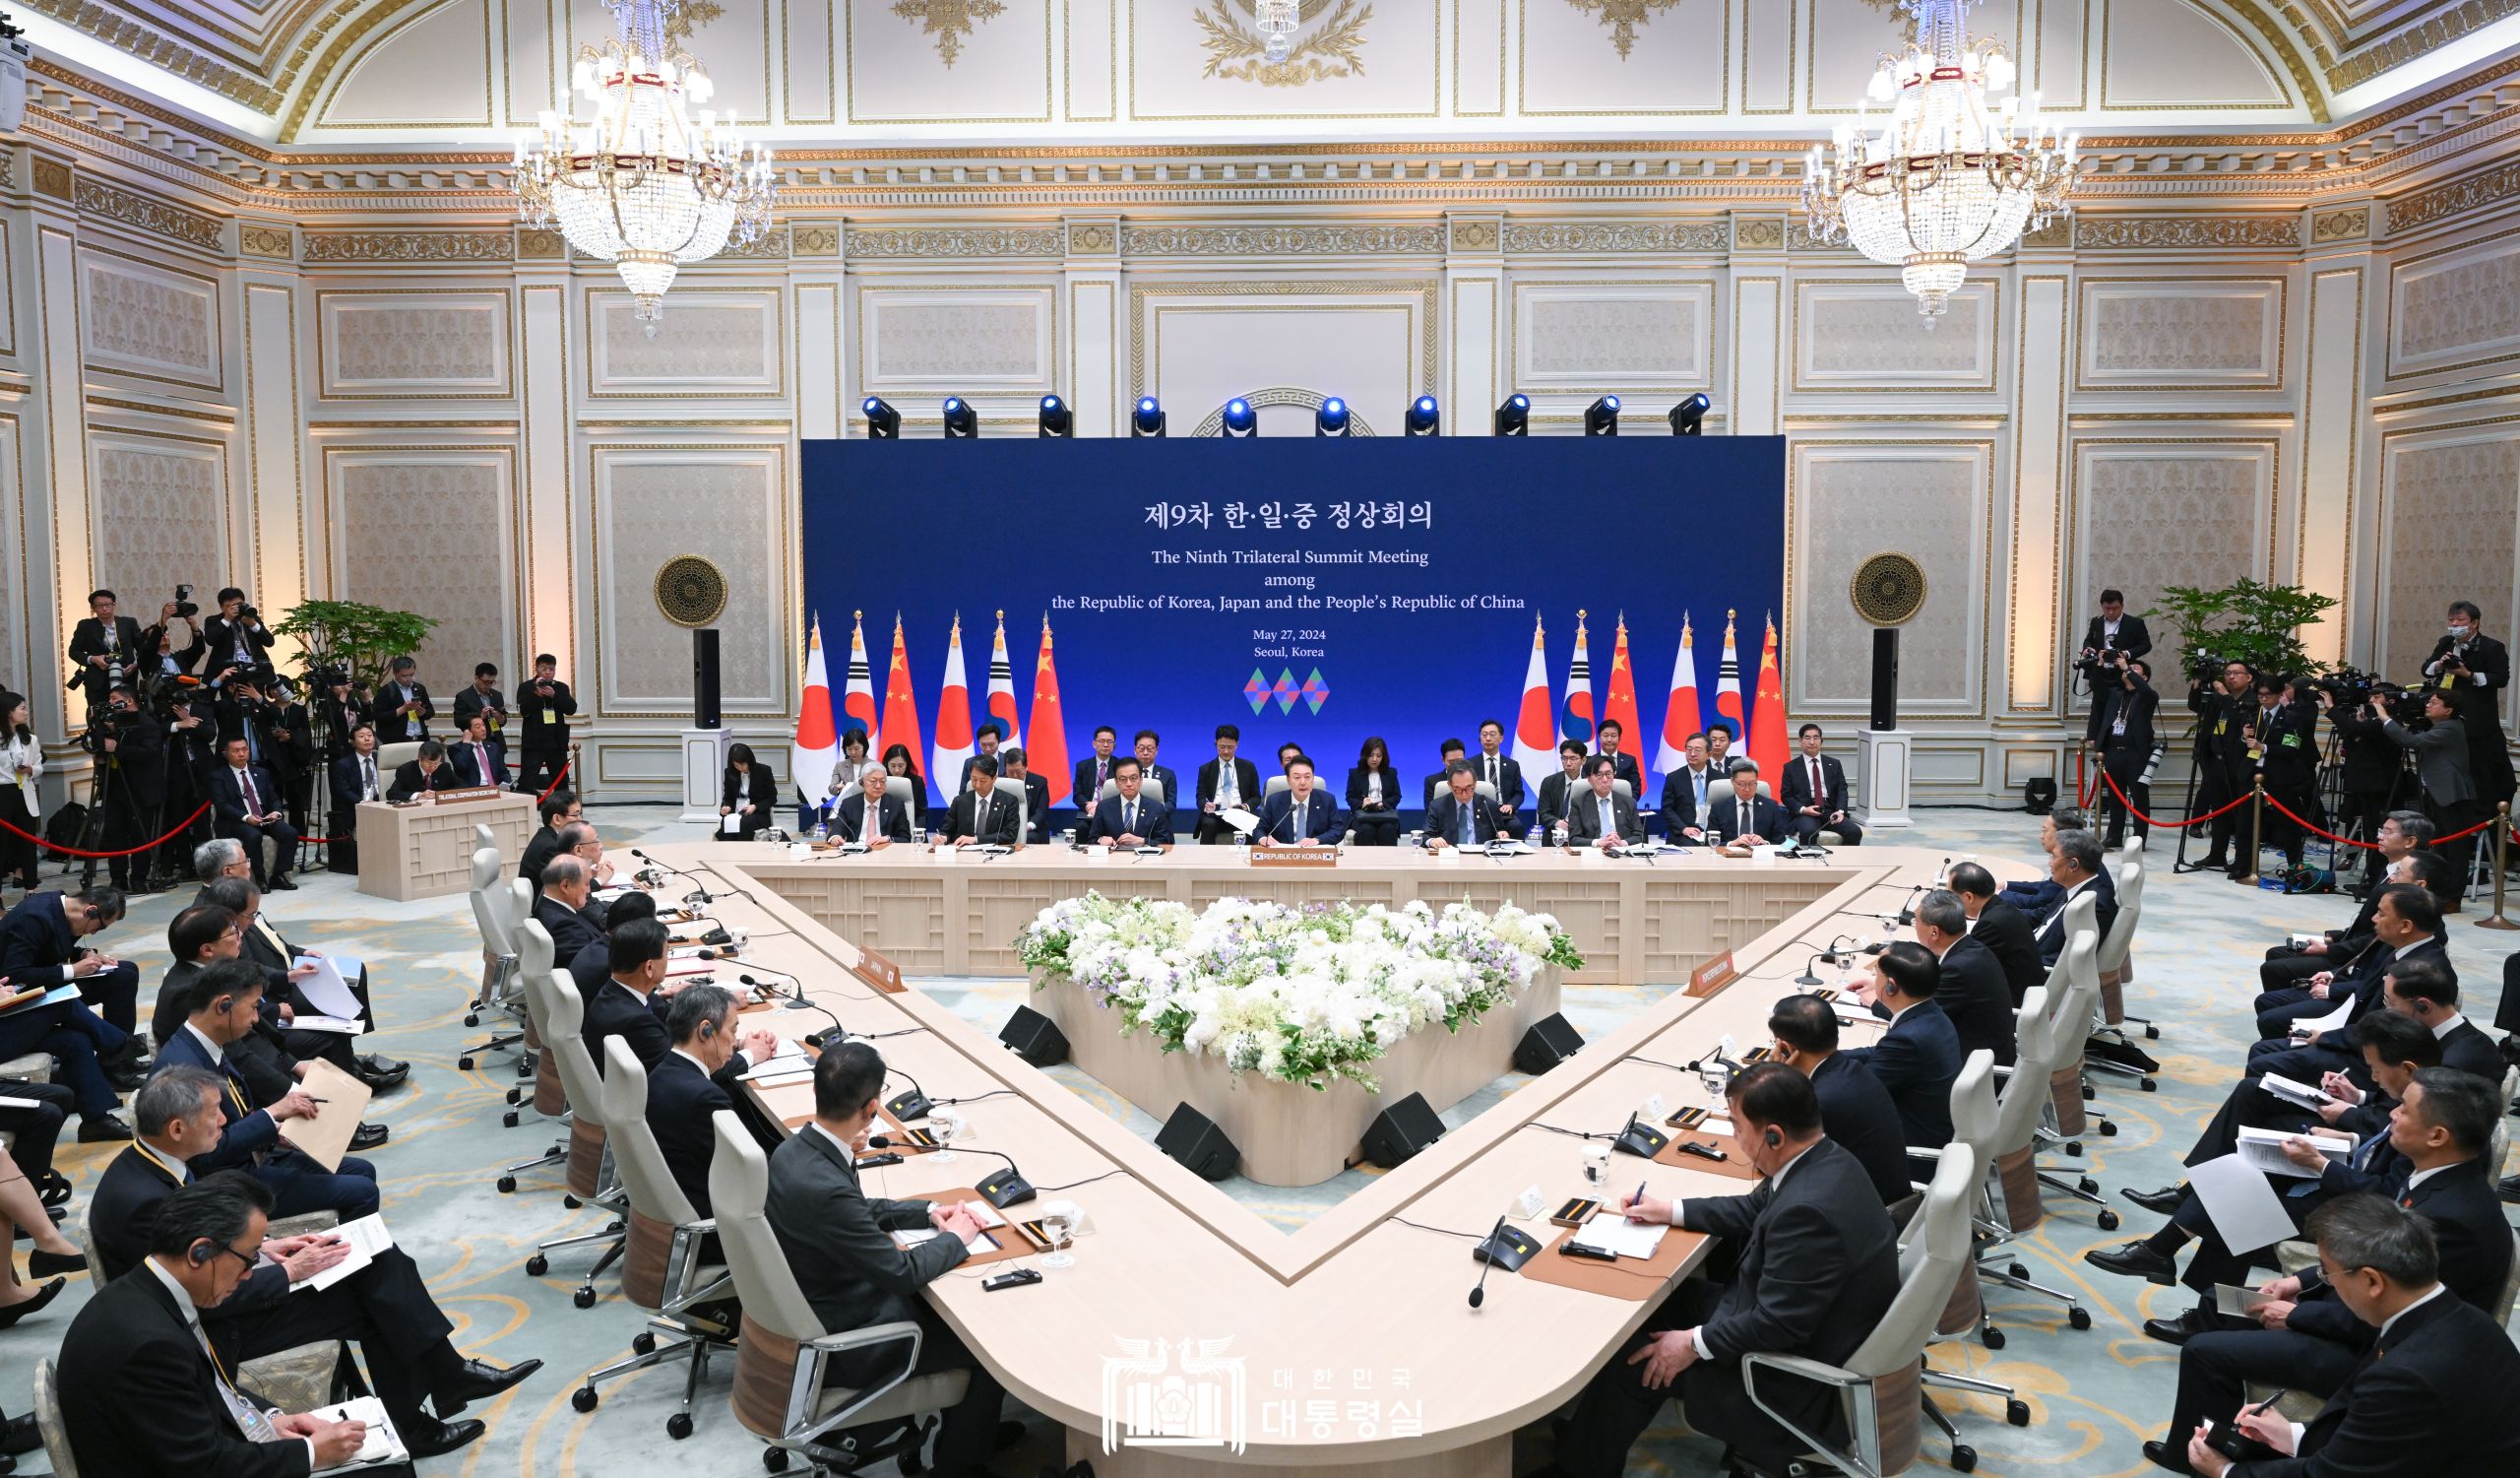 Joint Declaration of the Ninth ROK-Japan-China Trilateral SummitJoint Declaration of the Ninth ROK-Japan-China Trilateral Summit